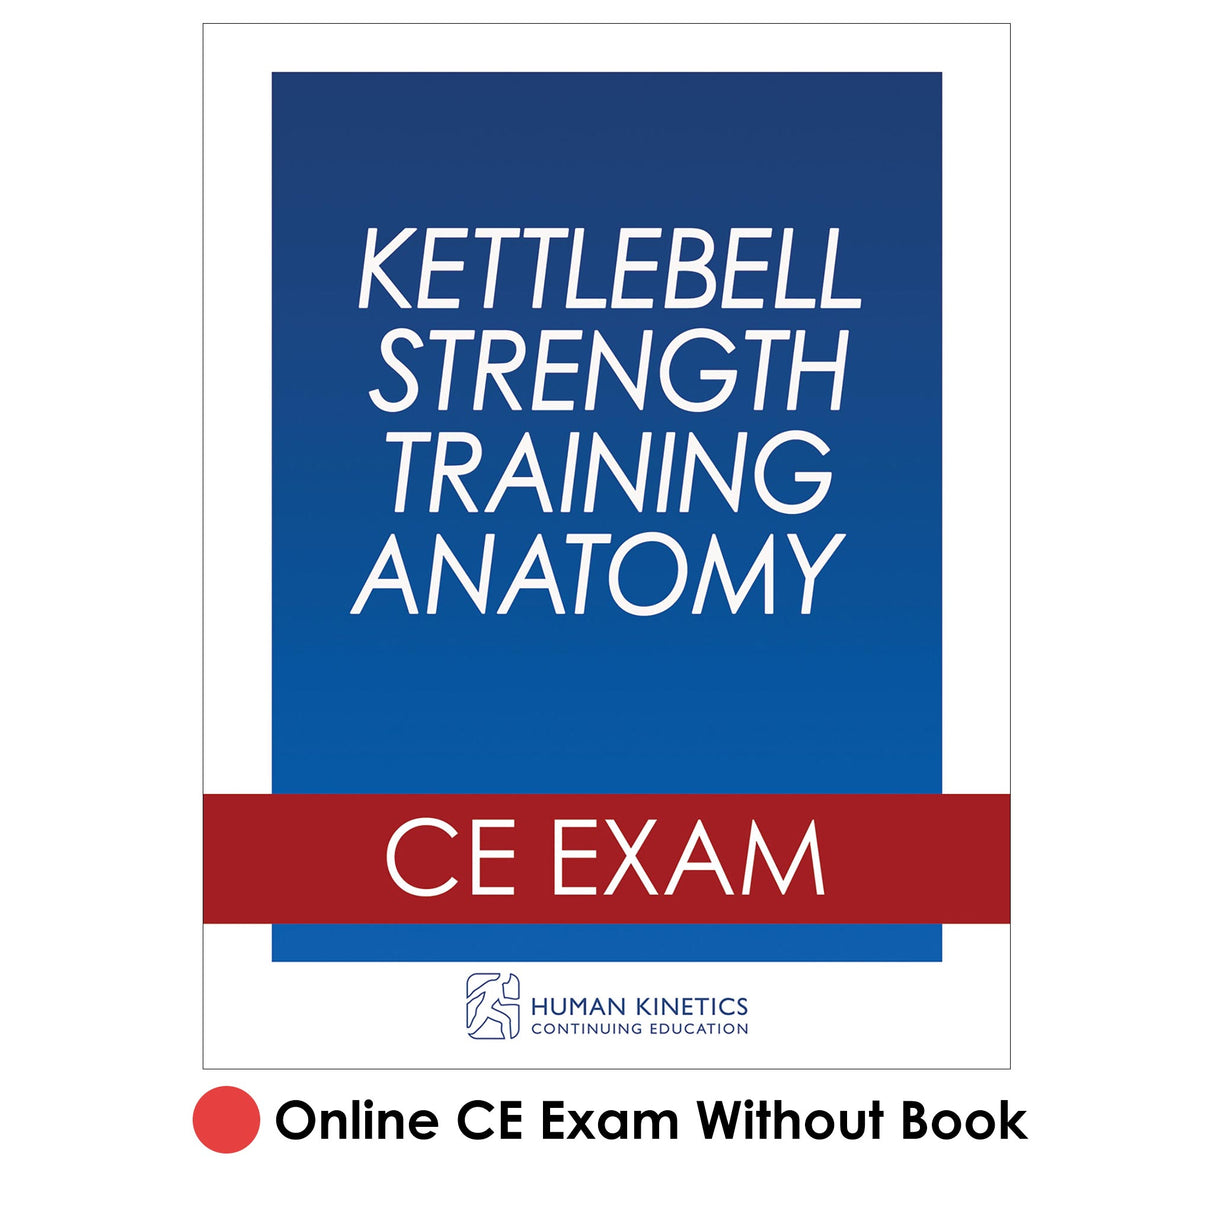 Kettlebell Strength Training Anatomy Online CE Exam Without Book